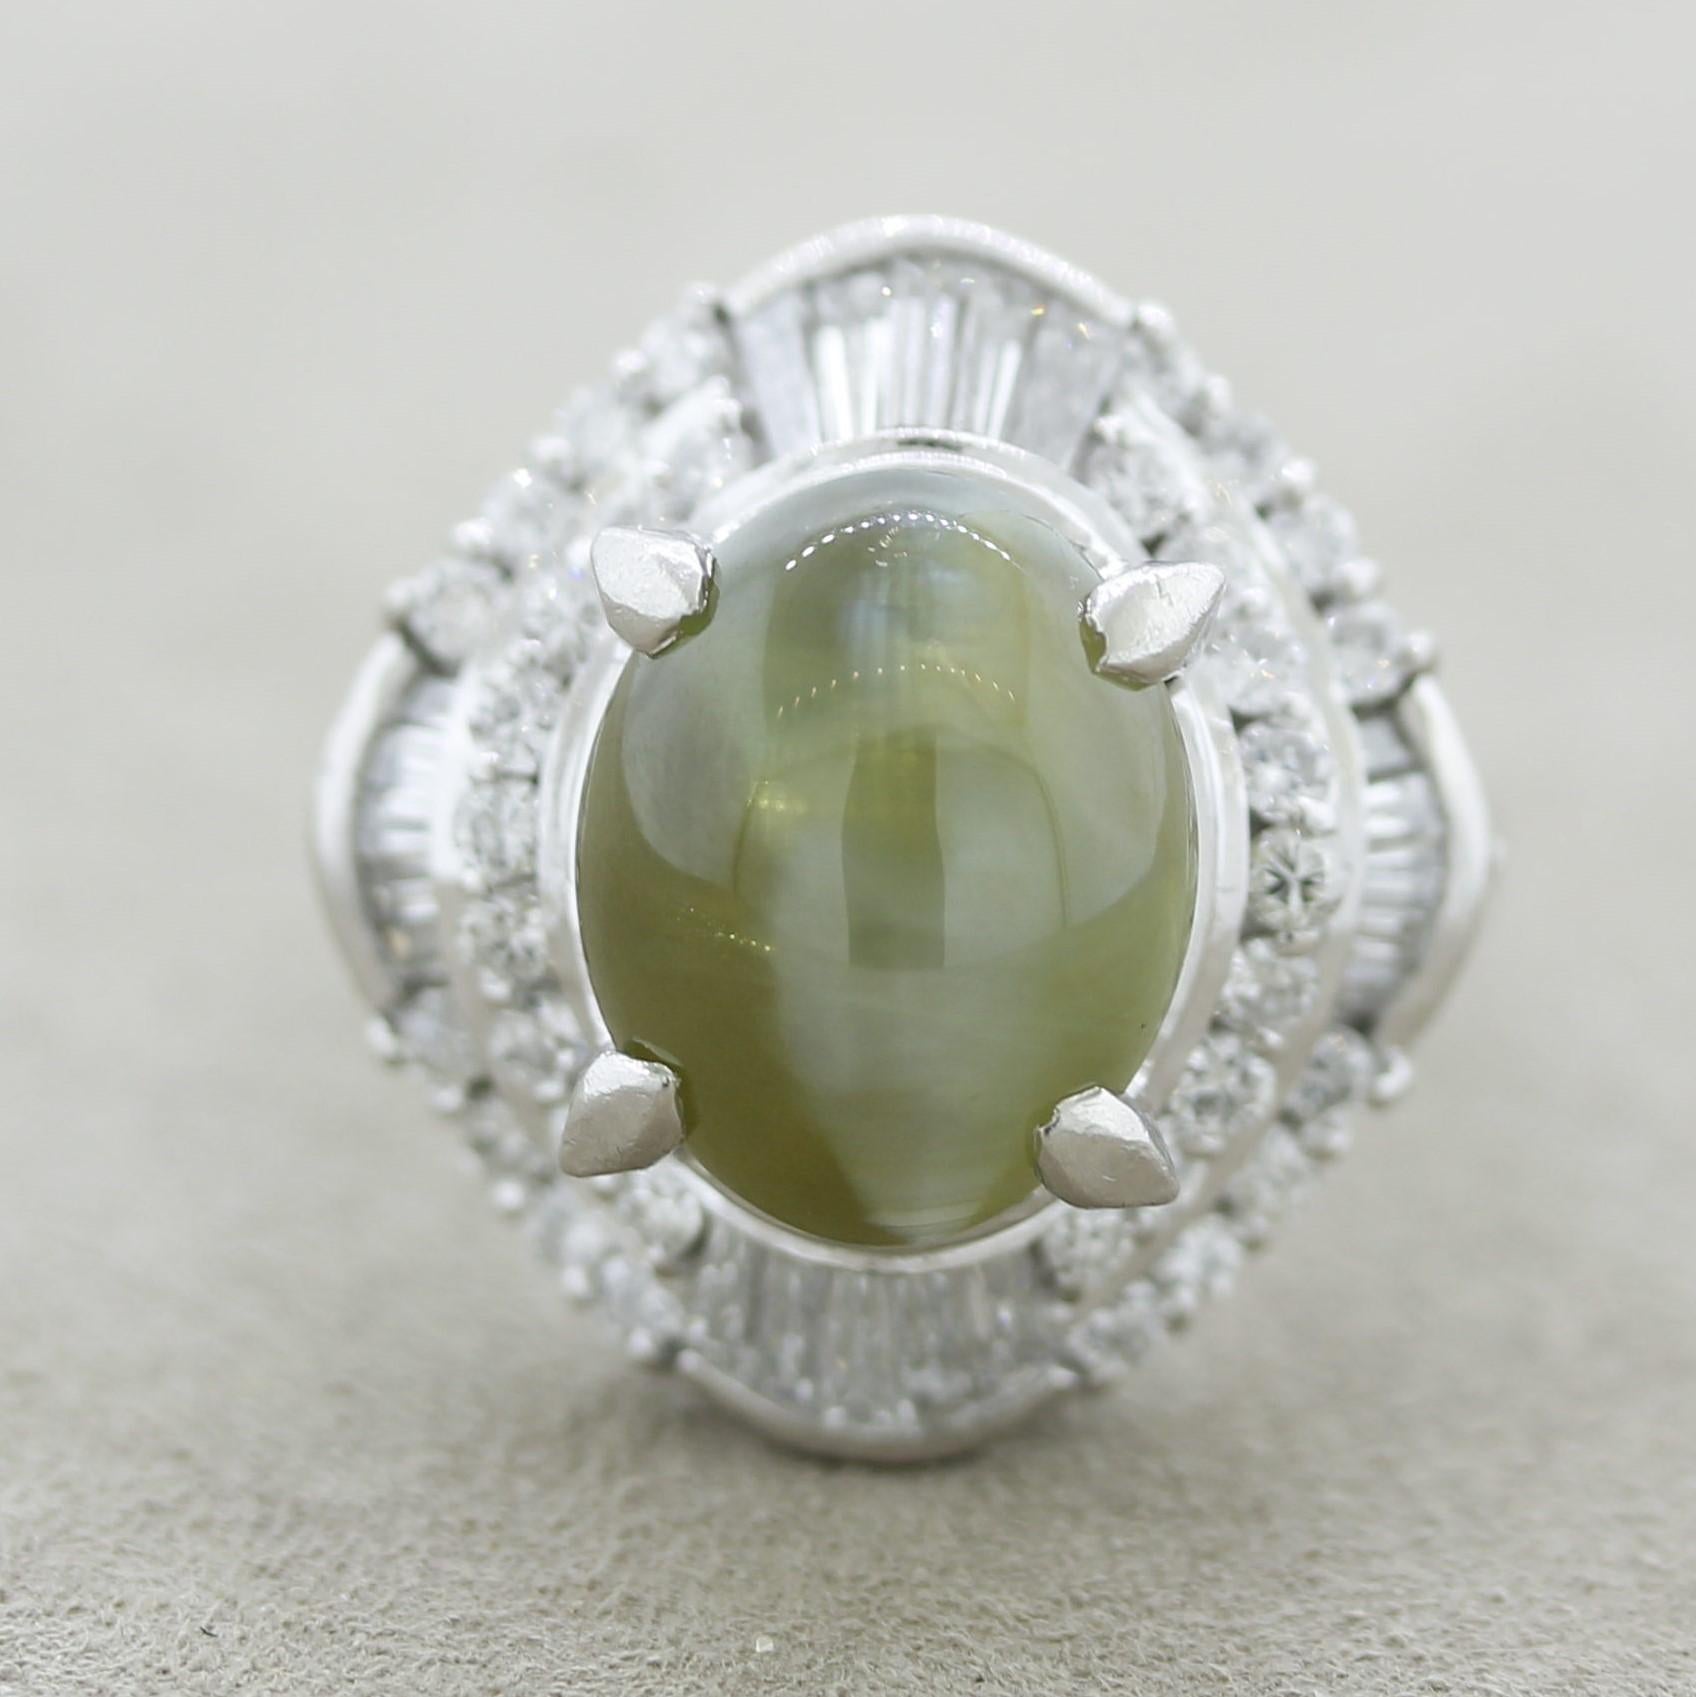 A lovely platinum made ring featuring a large natural cats eye chrysoberyl weighing 11.85 carats. It has a strong eye and a pleasing yellowish-green color. It is complemented by 1.38 carats of diamonds set around the gemstone in a stylish pattern.